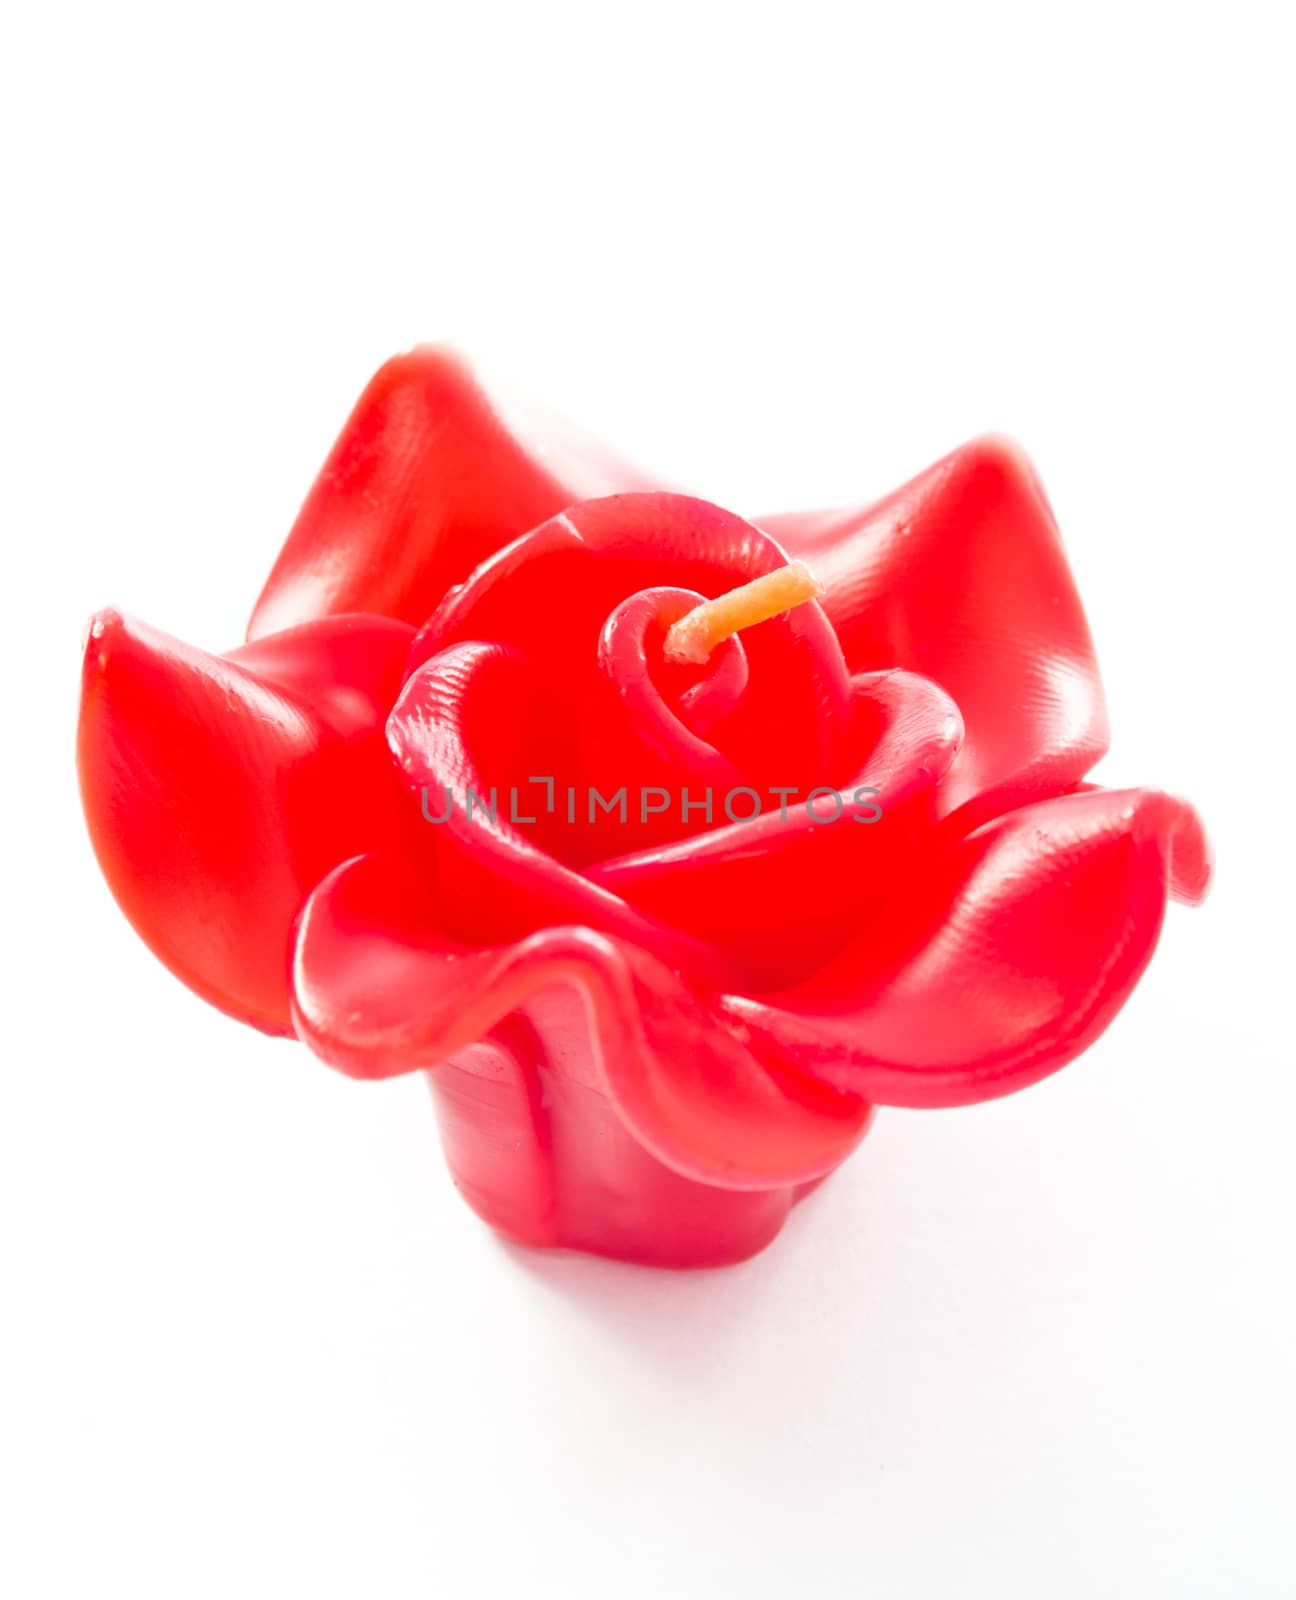 Red rose candle isolated on white background